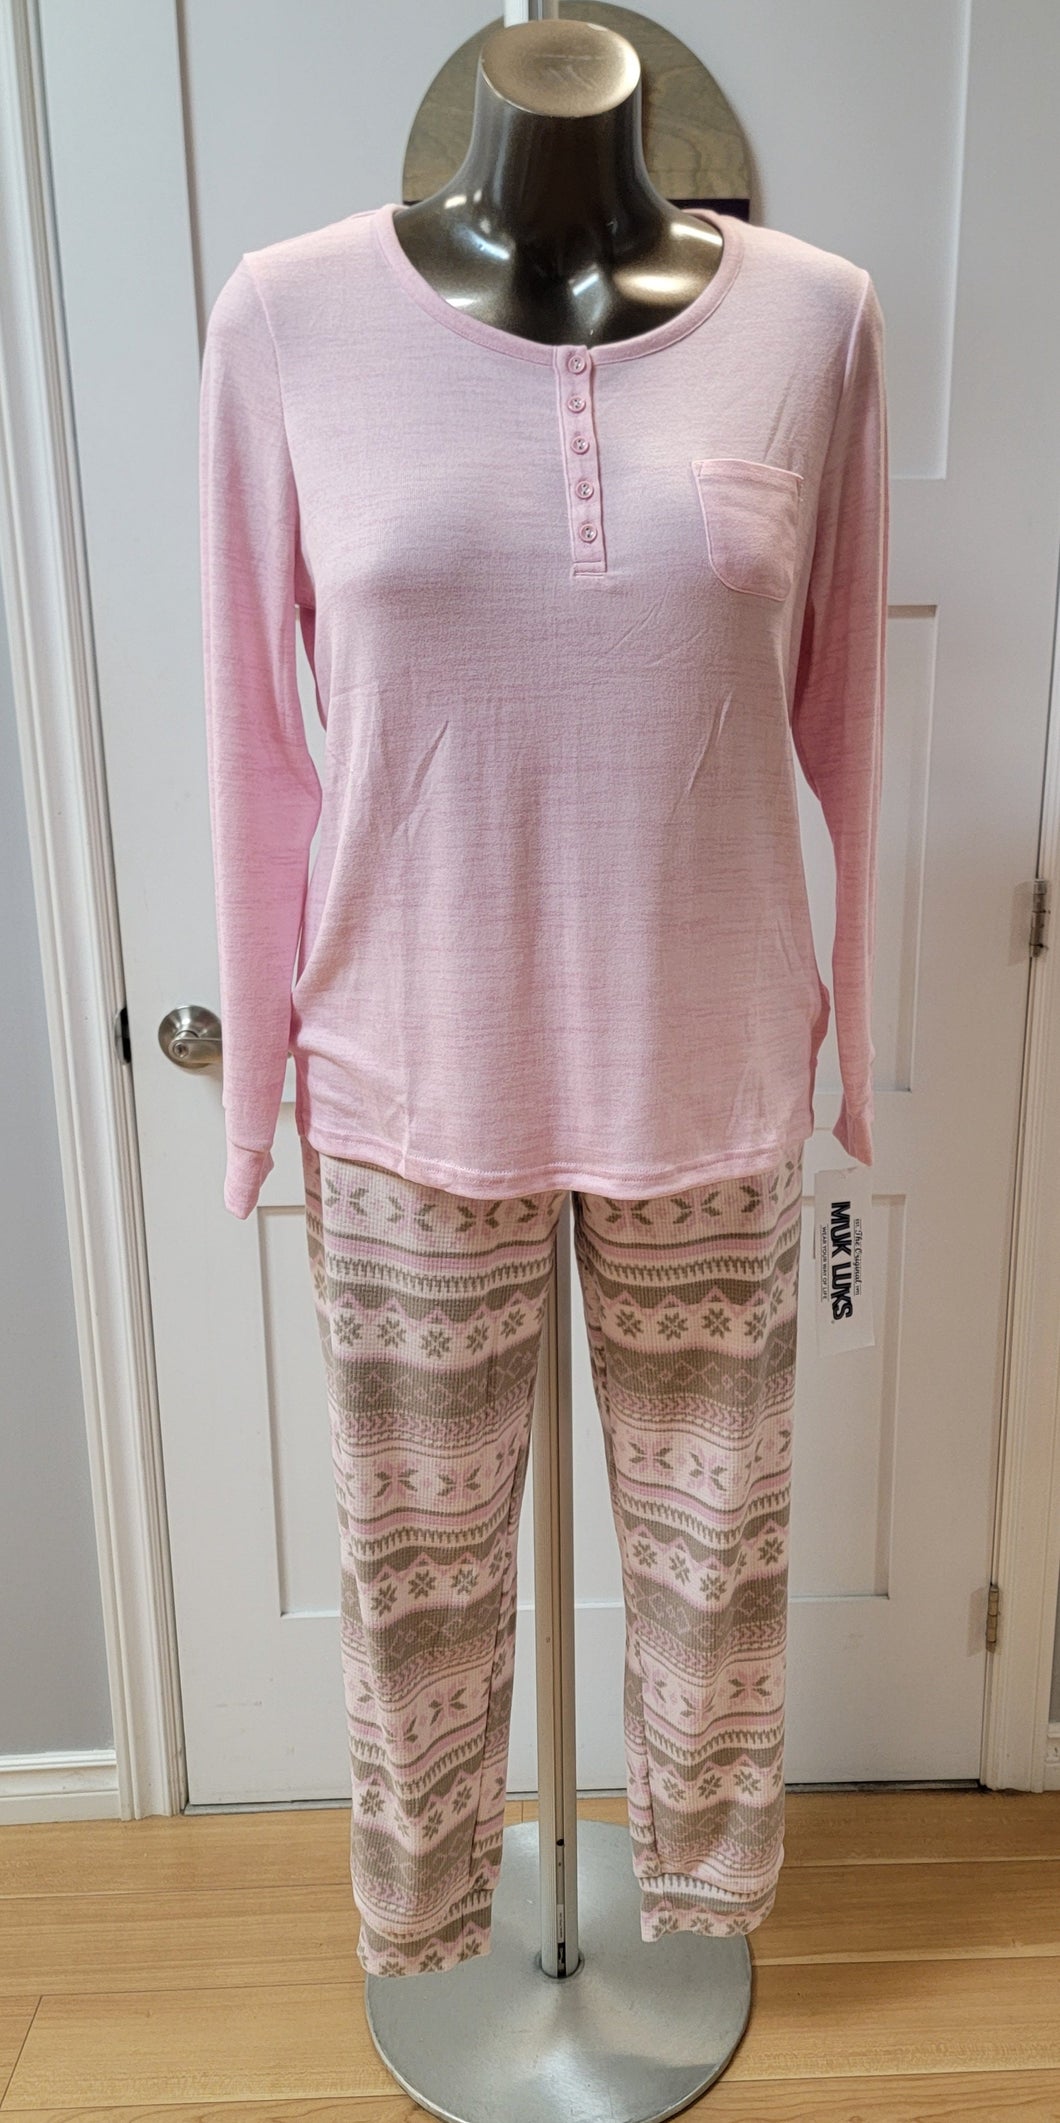 Muk Luks PJ Set Patterned Bottoms (available in plus sizes)